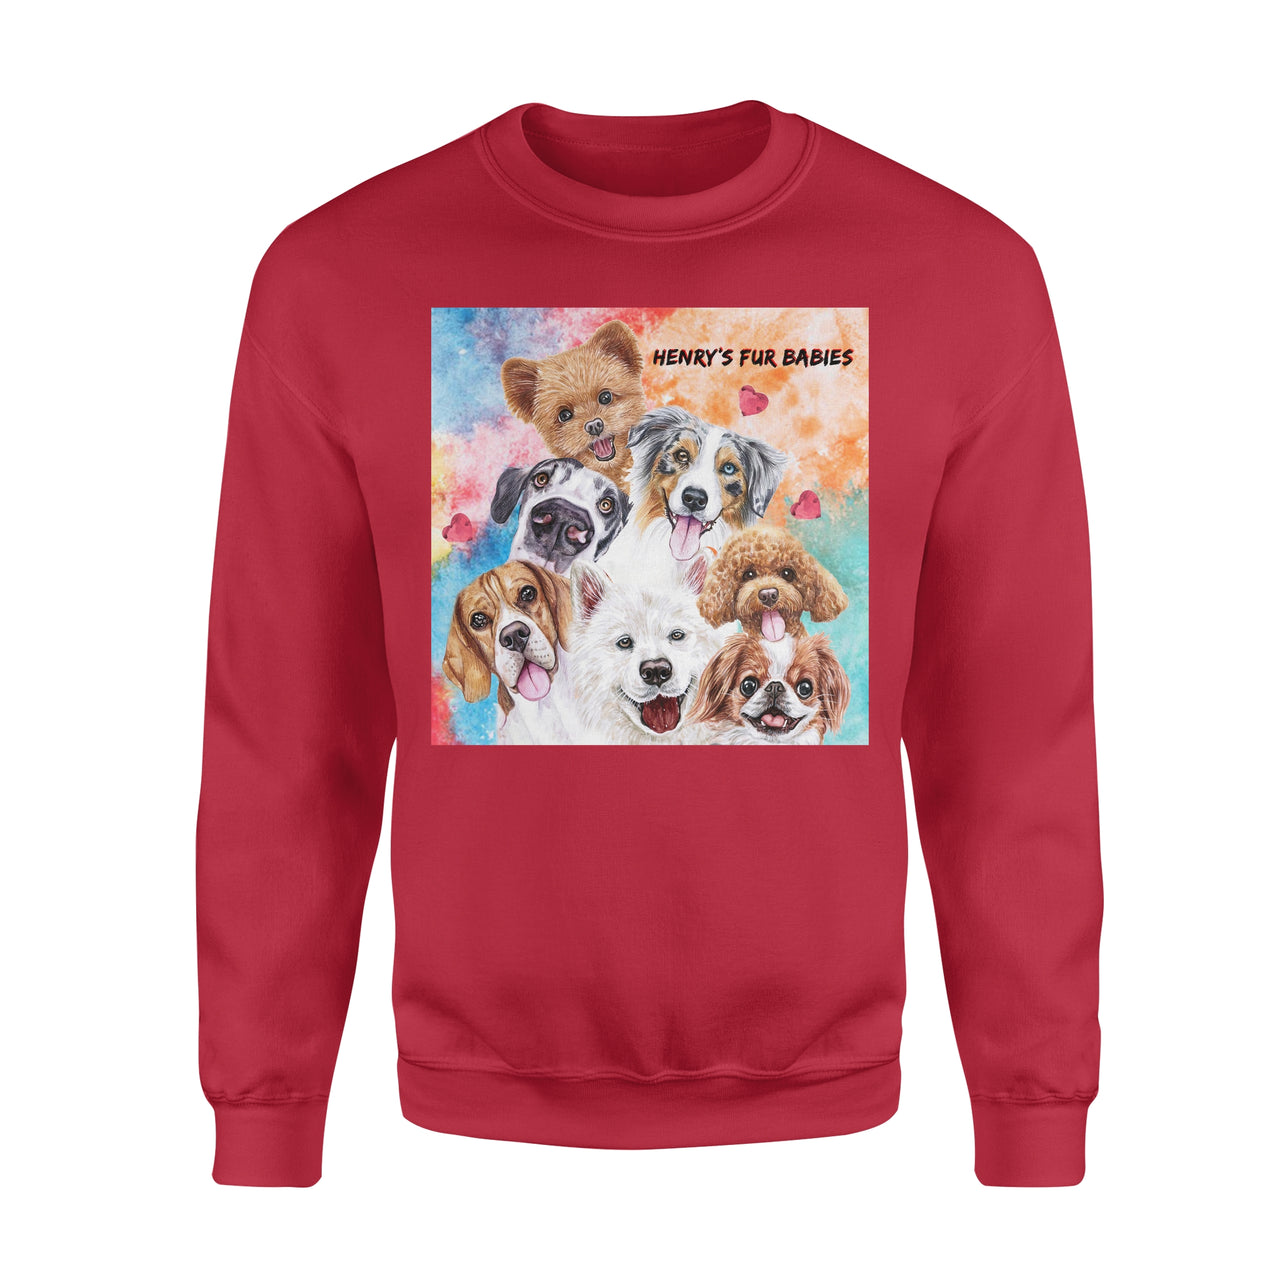 Personalized Father Day Dog Gift Idea - First Fur Babies For Dog Dad - Standard Crew Neck Sweatshirt